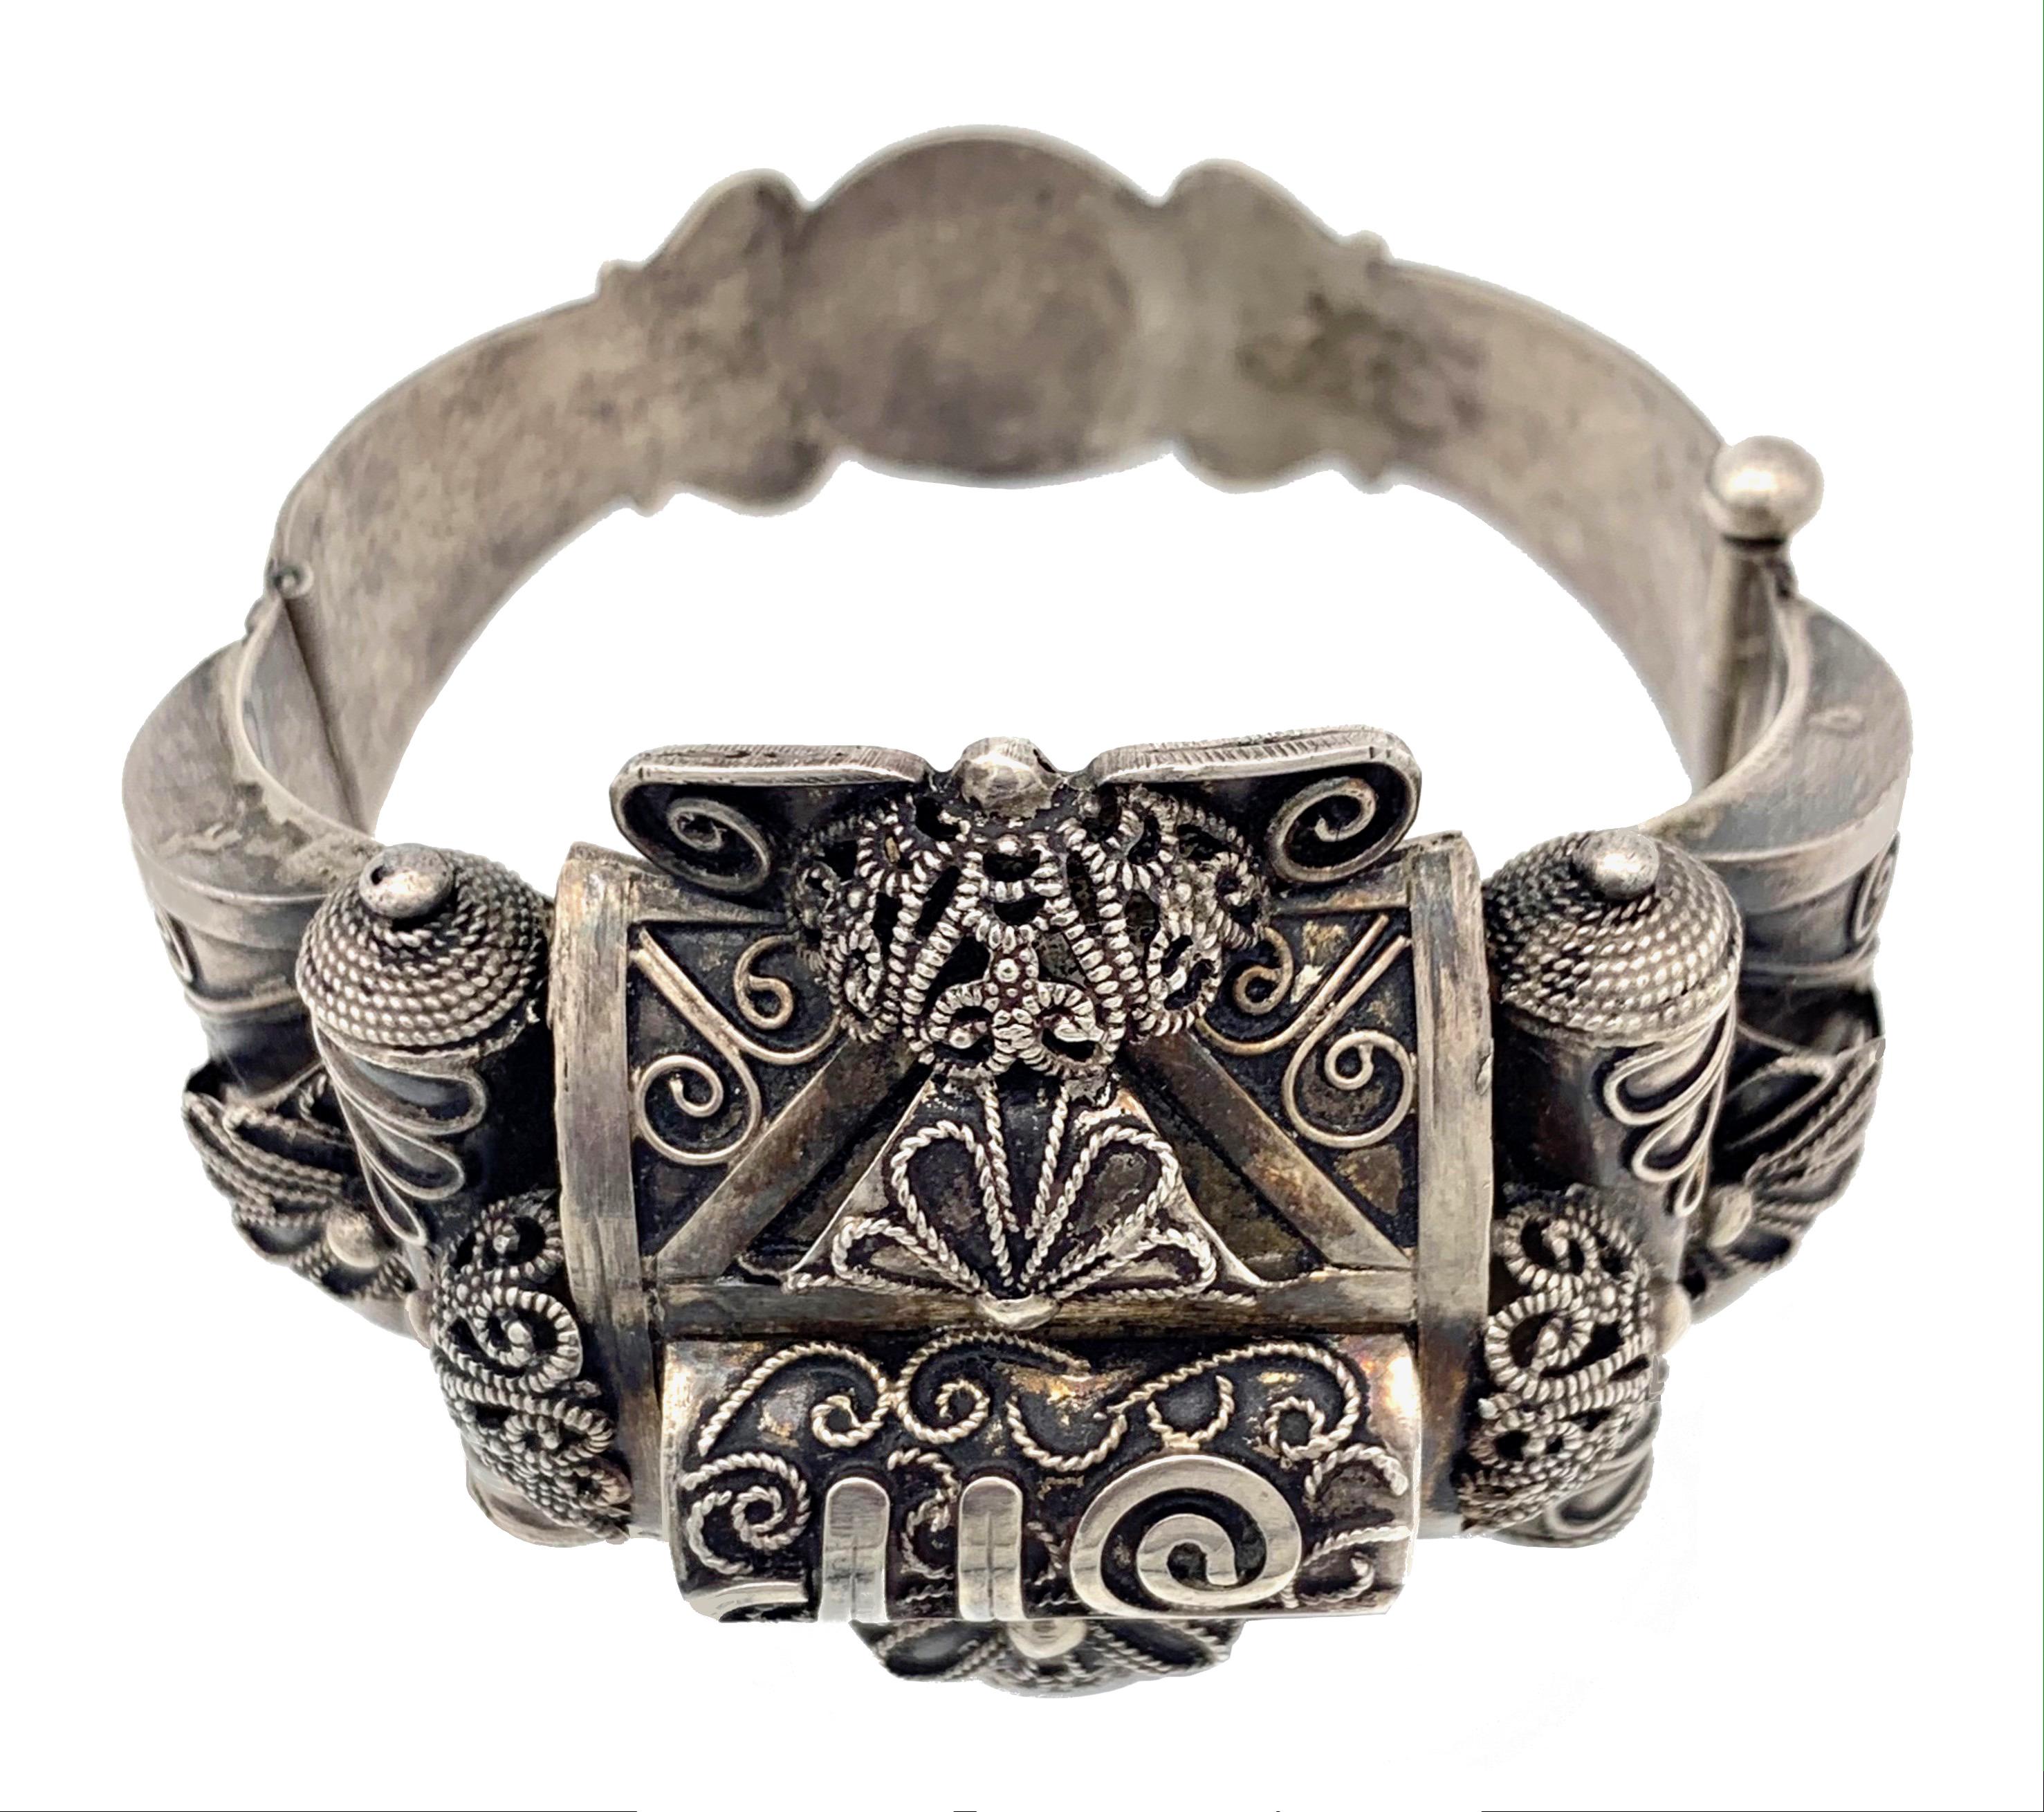 This substantial silver Bracelet has been handcrafted in North Africa around the beginning of the 20th century.
The bracelet is decorated with applied twisted silver wire. 